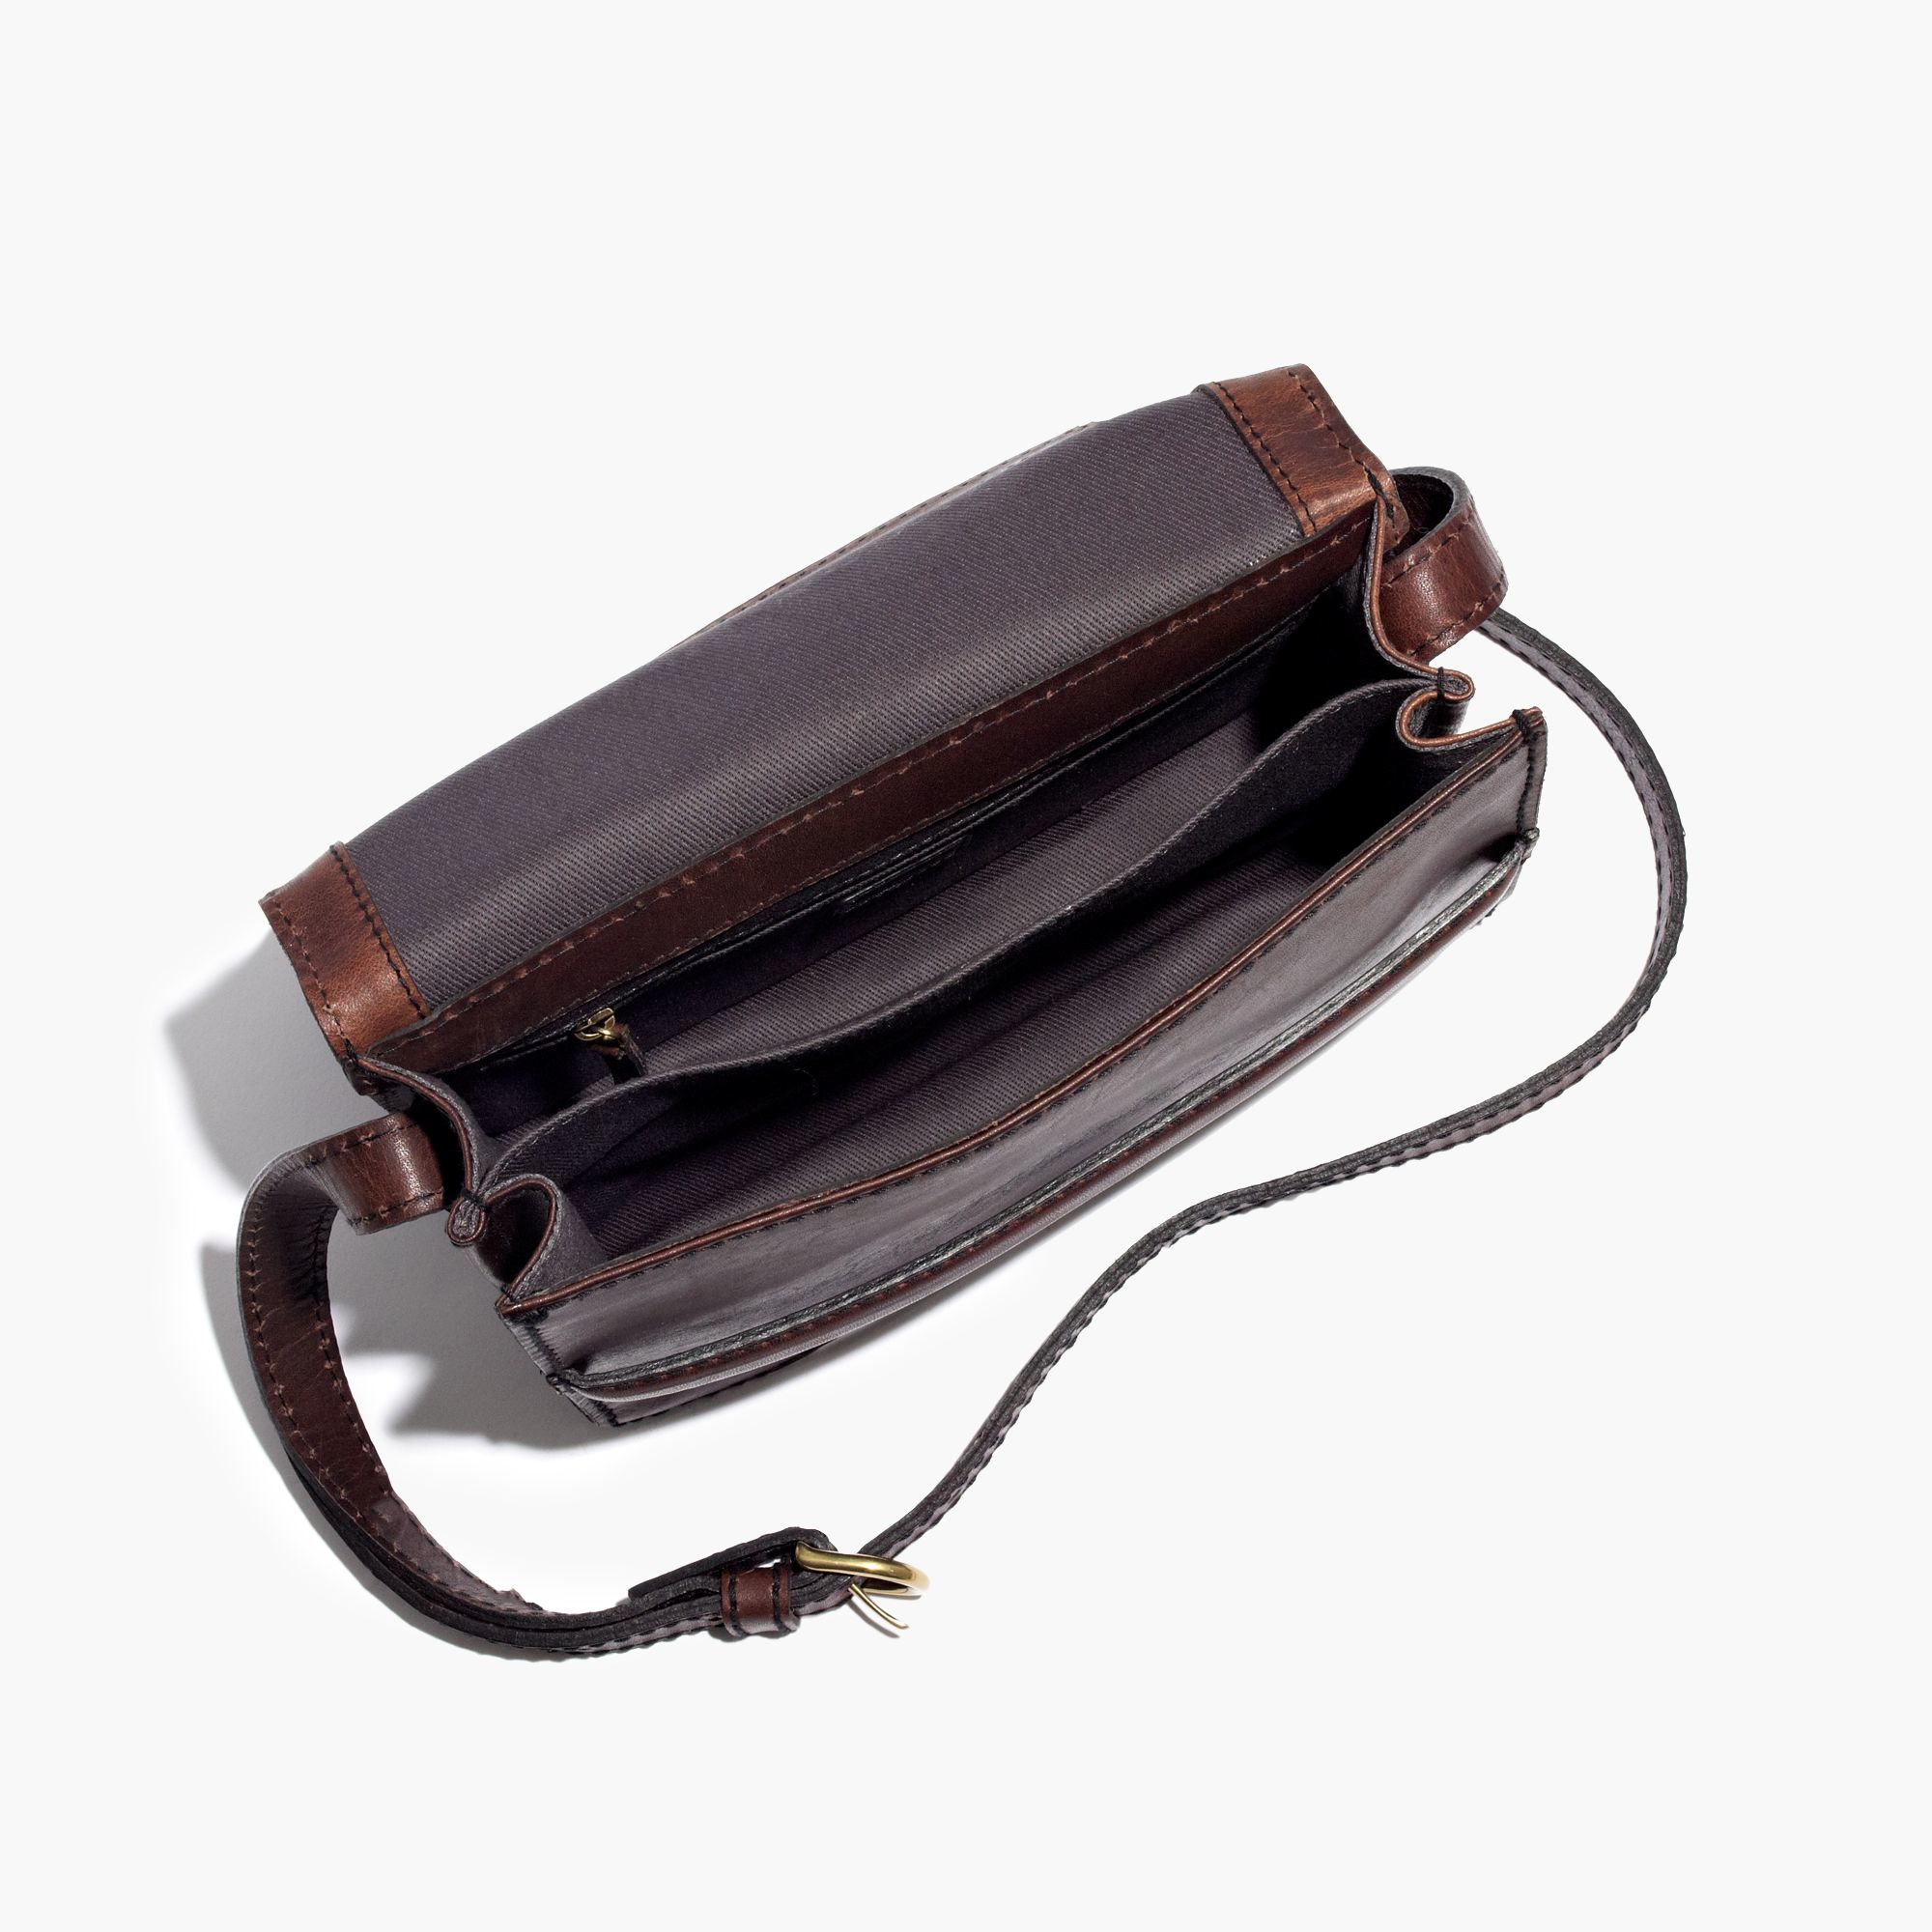 Madewell The Albury Crossbody Bag In Leather in Brown - Lyst